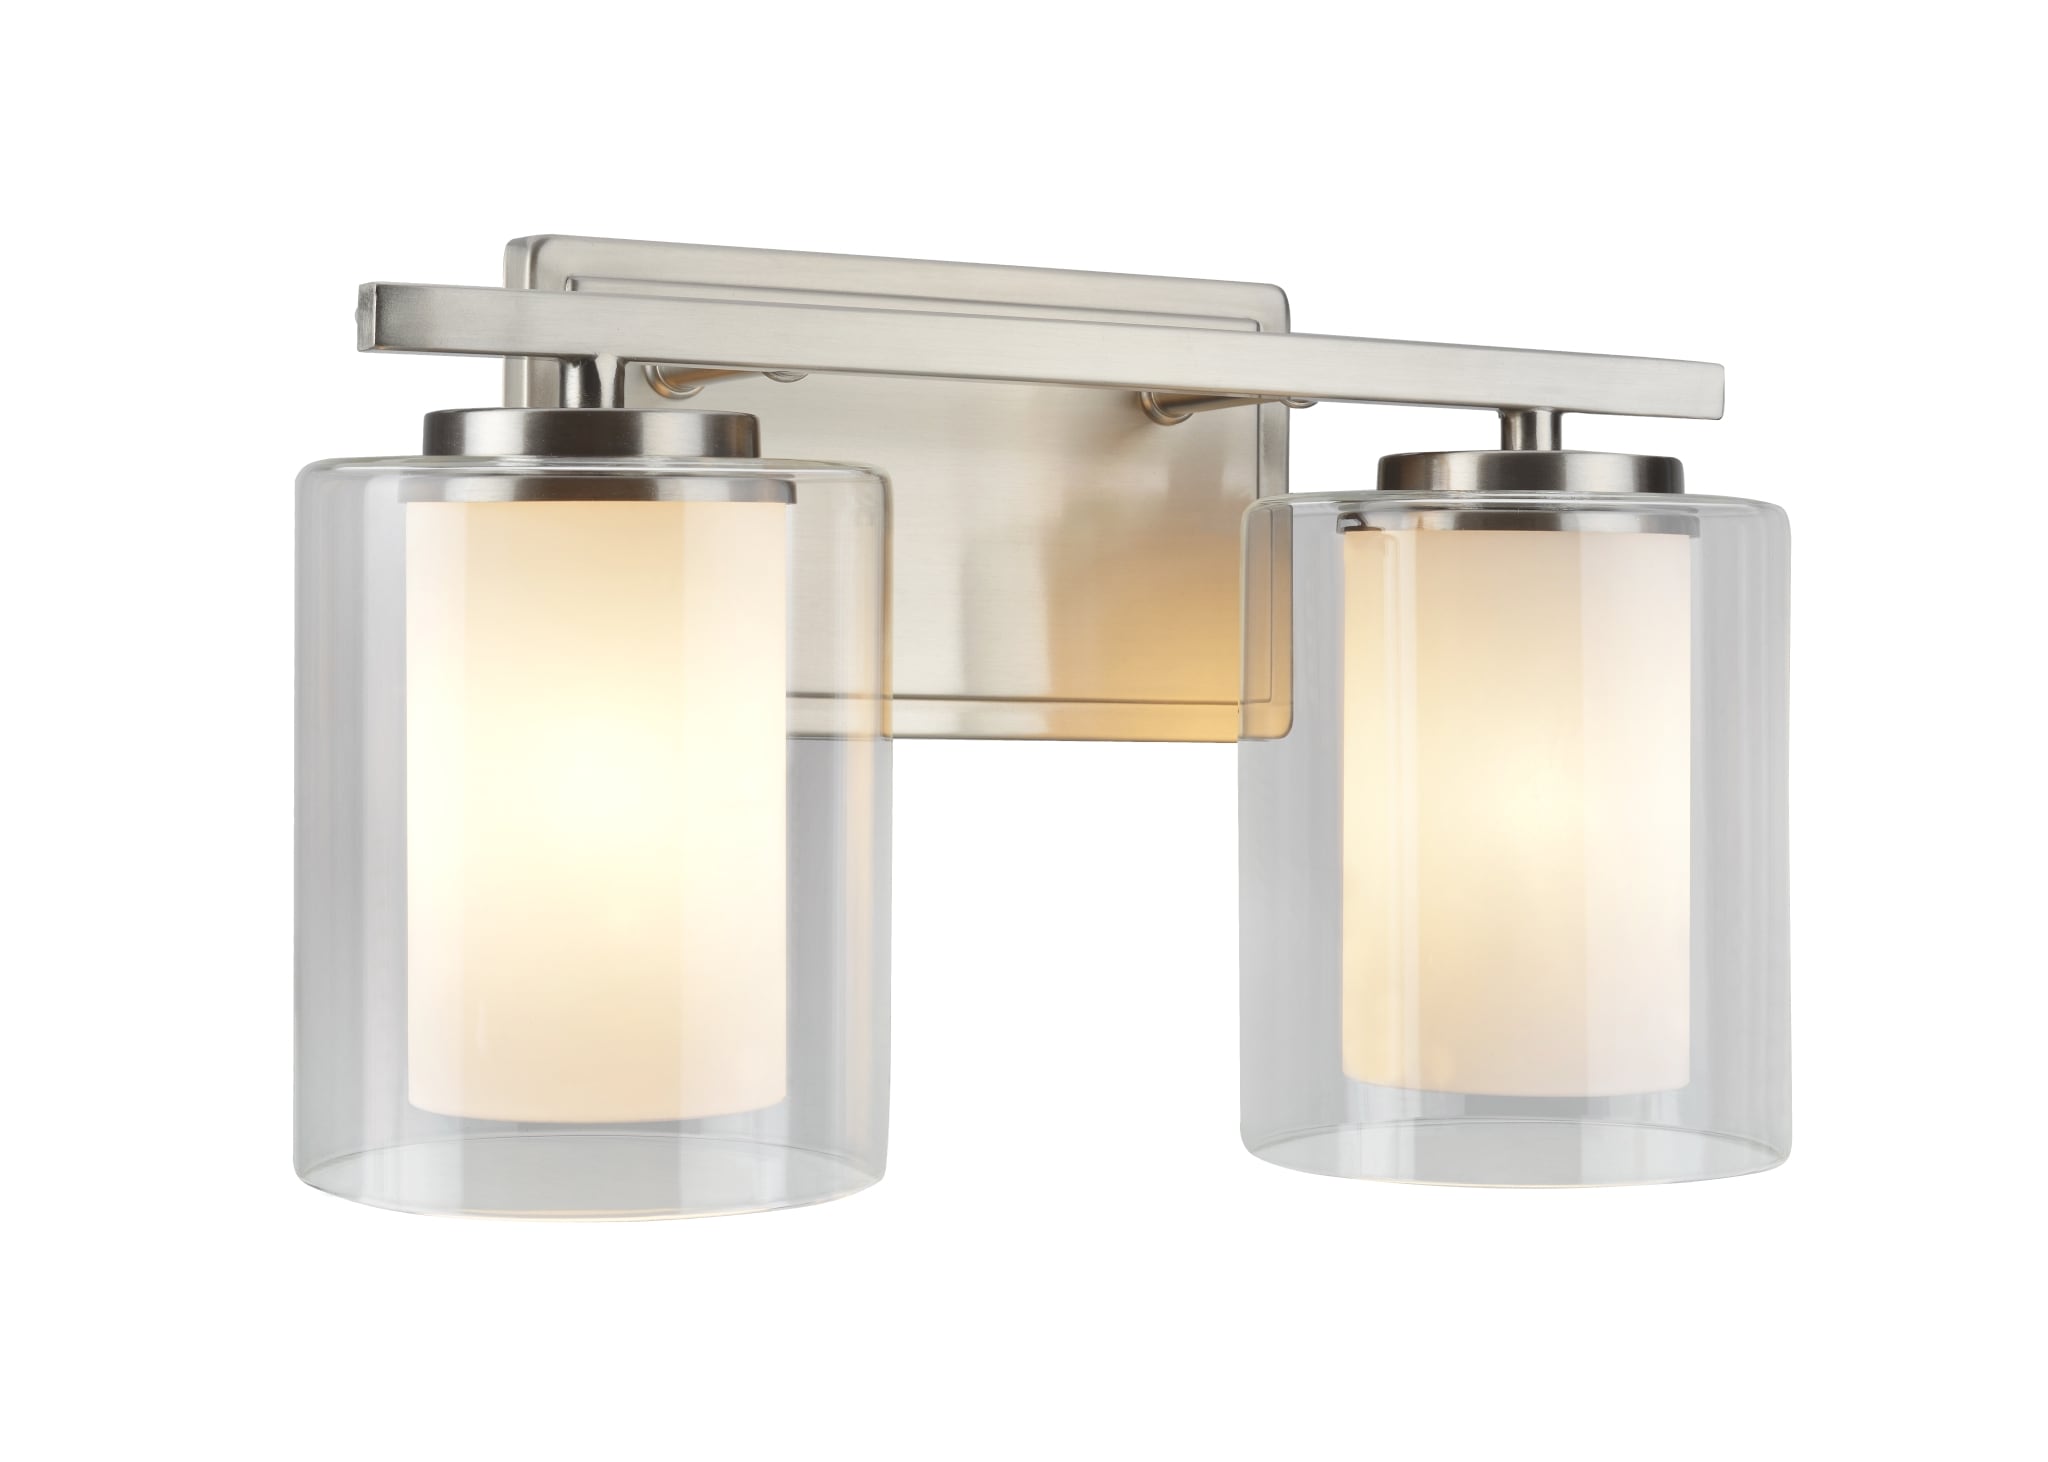 Aspen Creative 62133 Transitional Design in Brushed Nickel with Faux Alabaster Glass Shade 5 1/2 Wide 5 1/2 Wide One-Light Metal Bathroom Vanity Wall Light Fixture